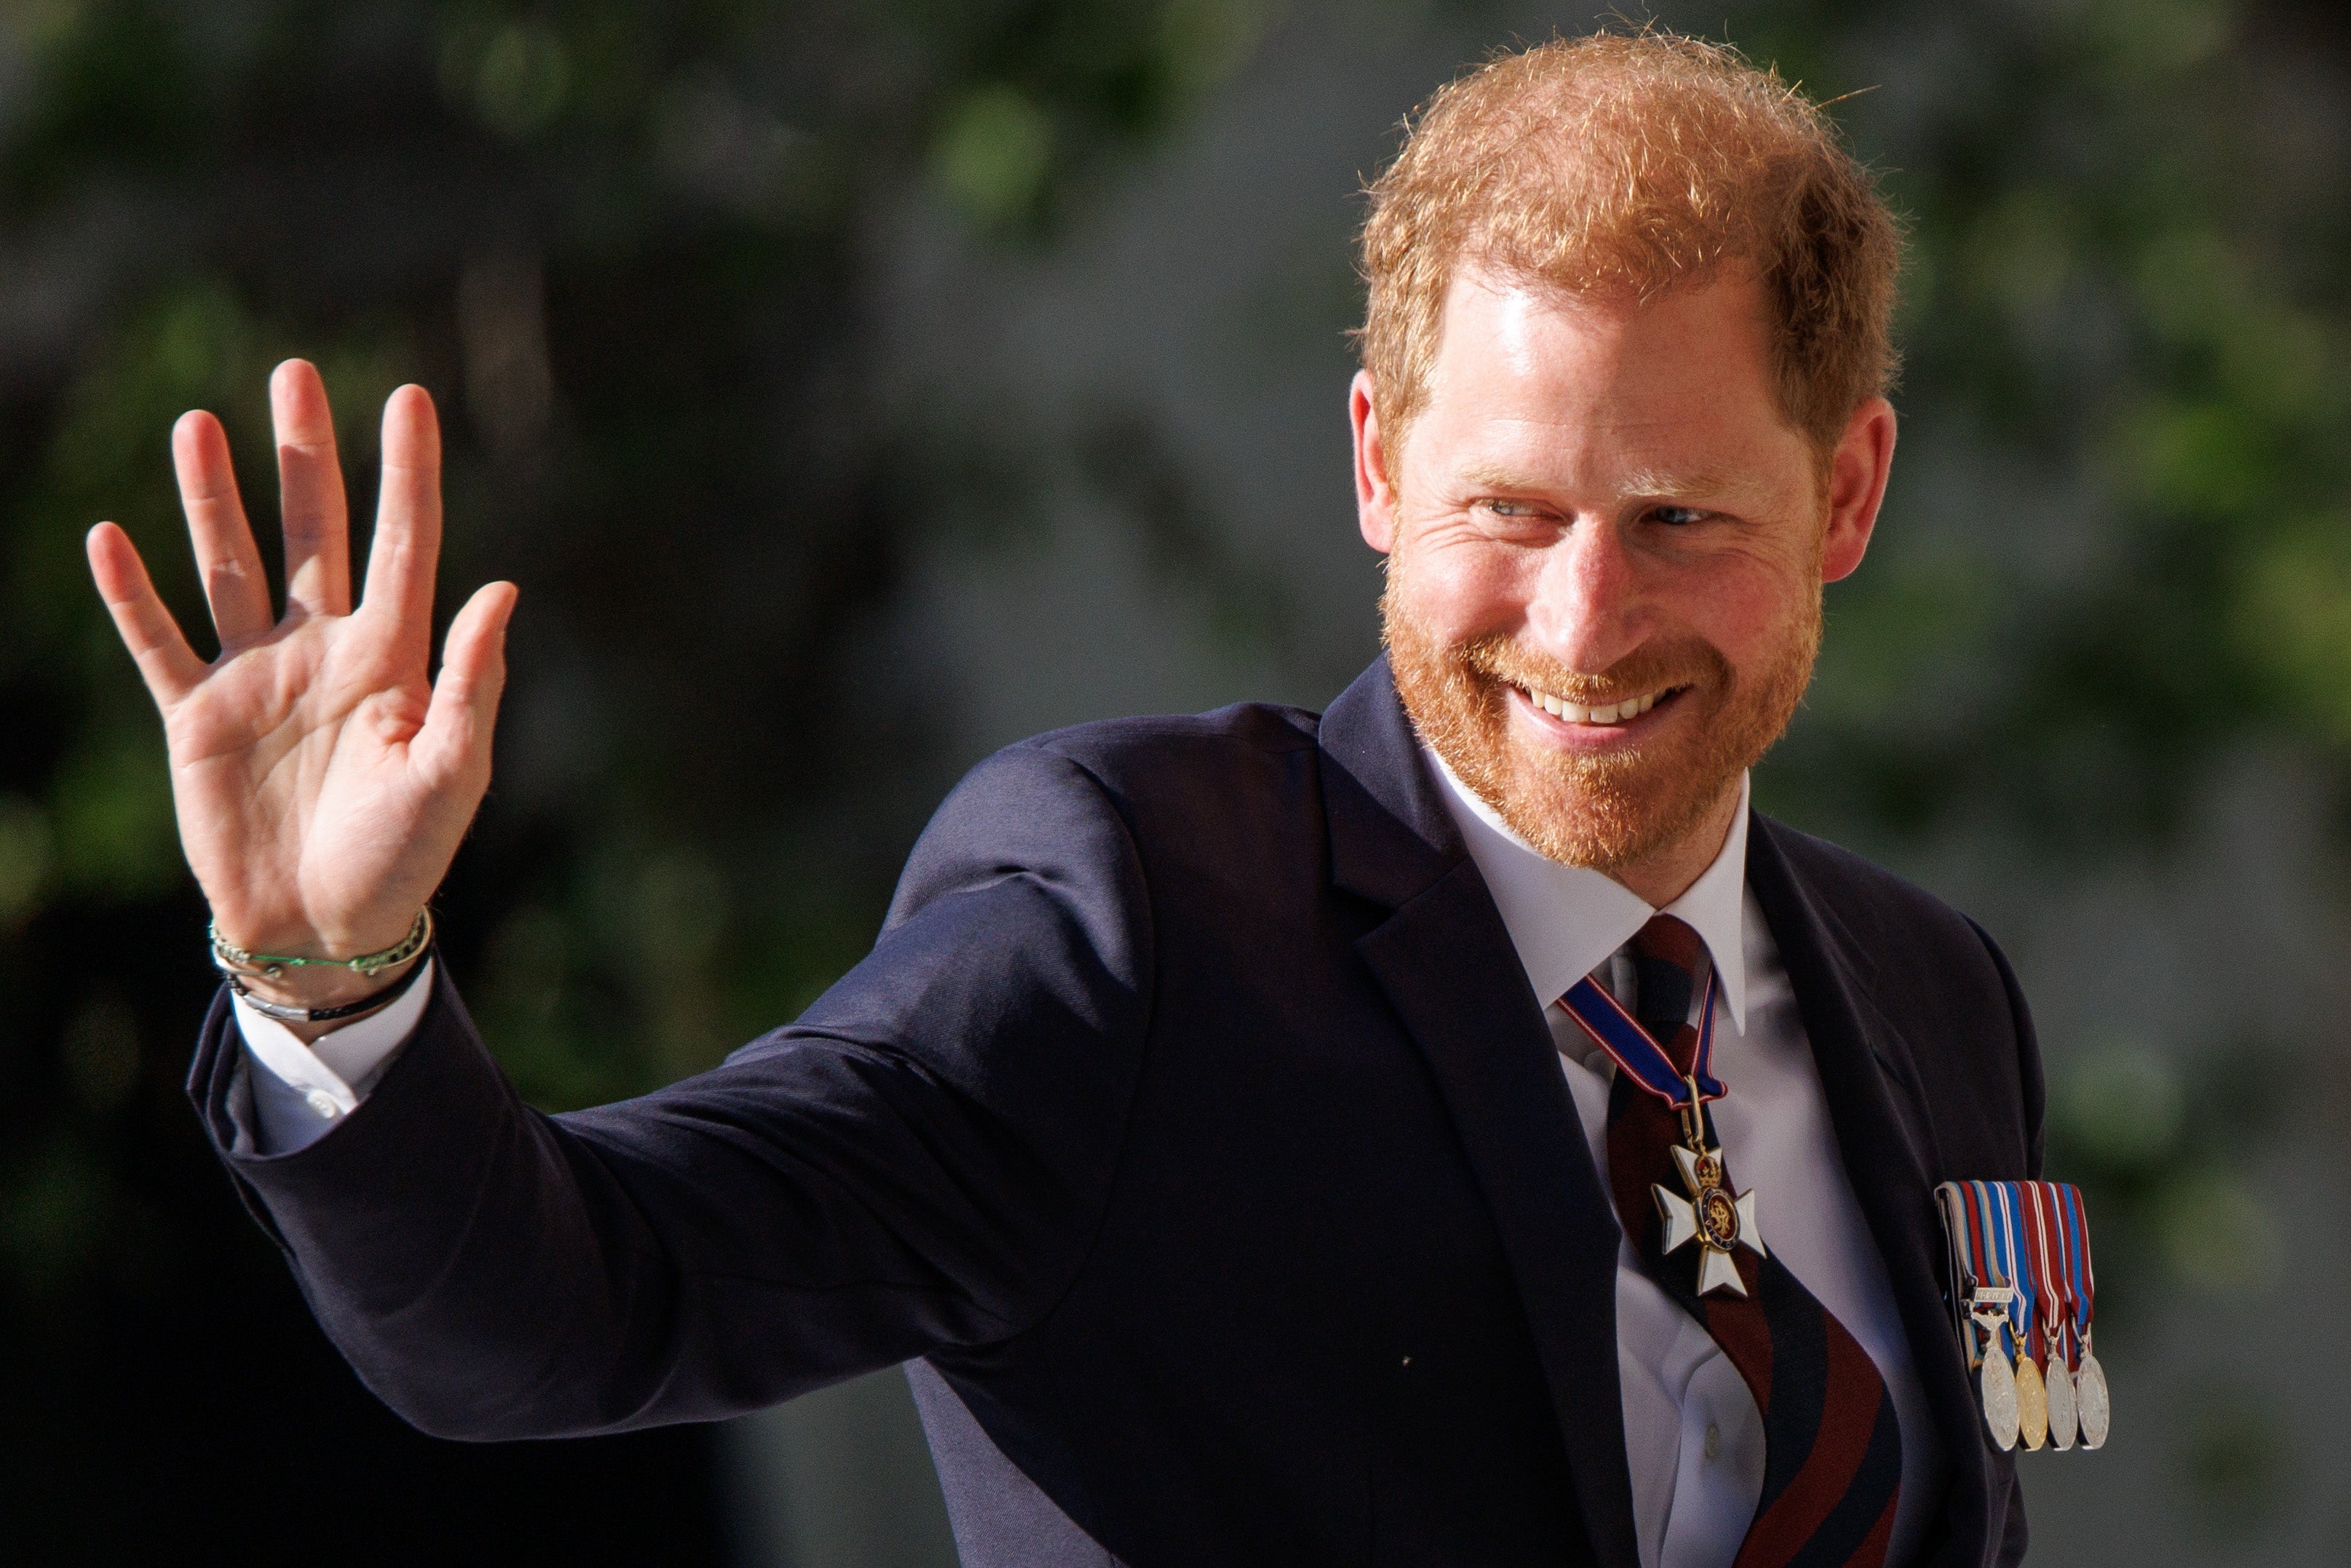 Prince Harry has distanced himself from the royal family